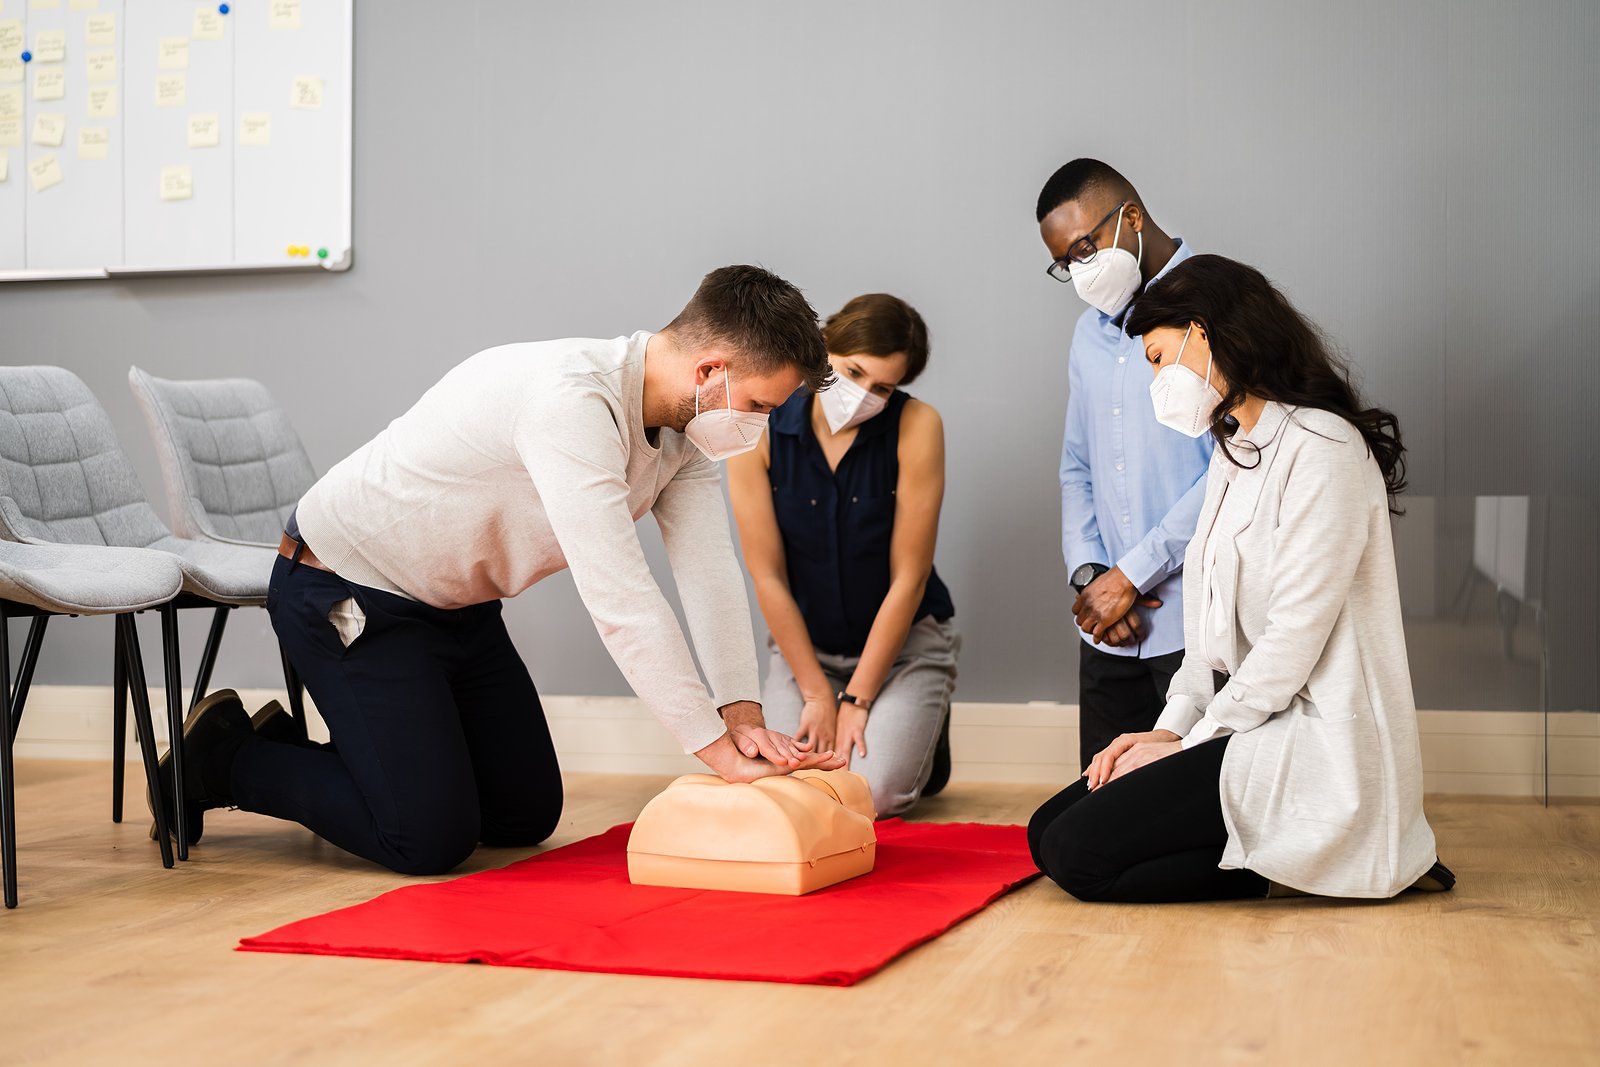 Check out the different types of CPR classes and see which one suits you best. For more details, call CPR Professionals CO today or visit the website now.